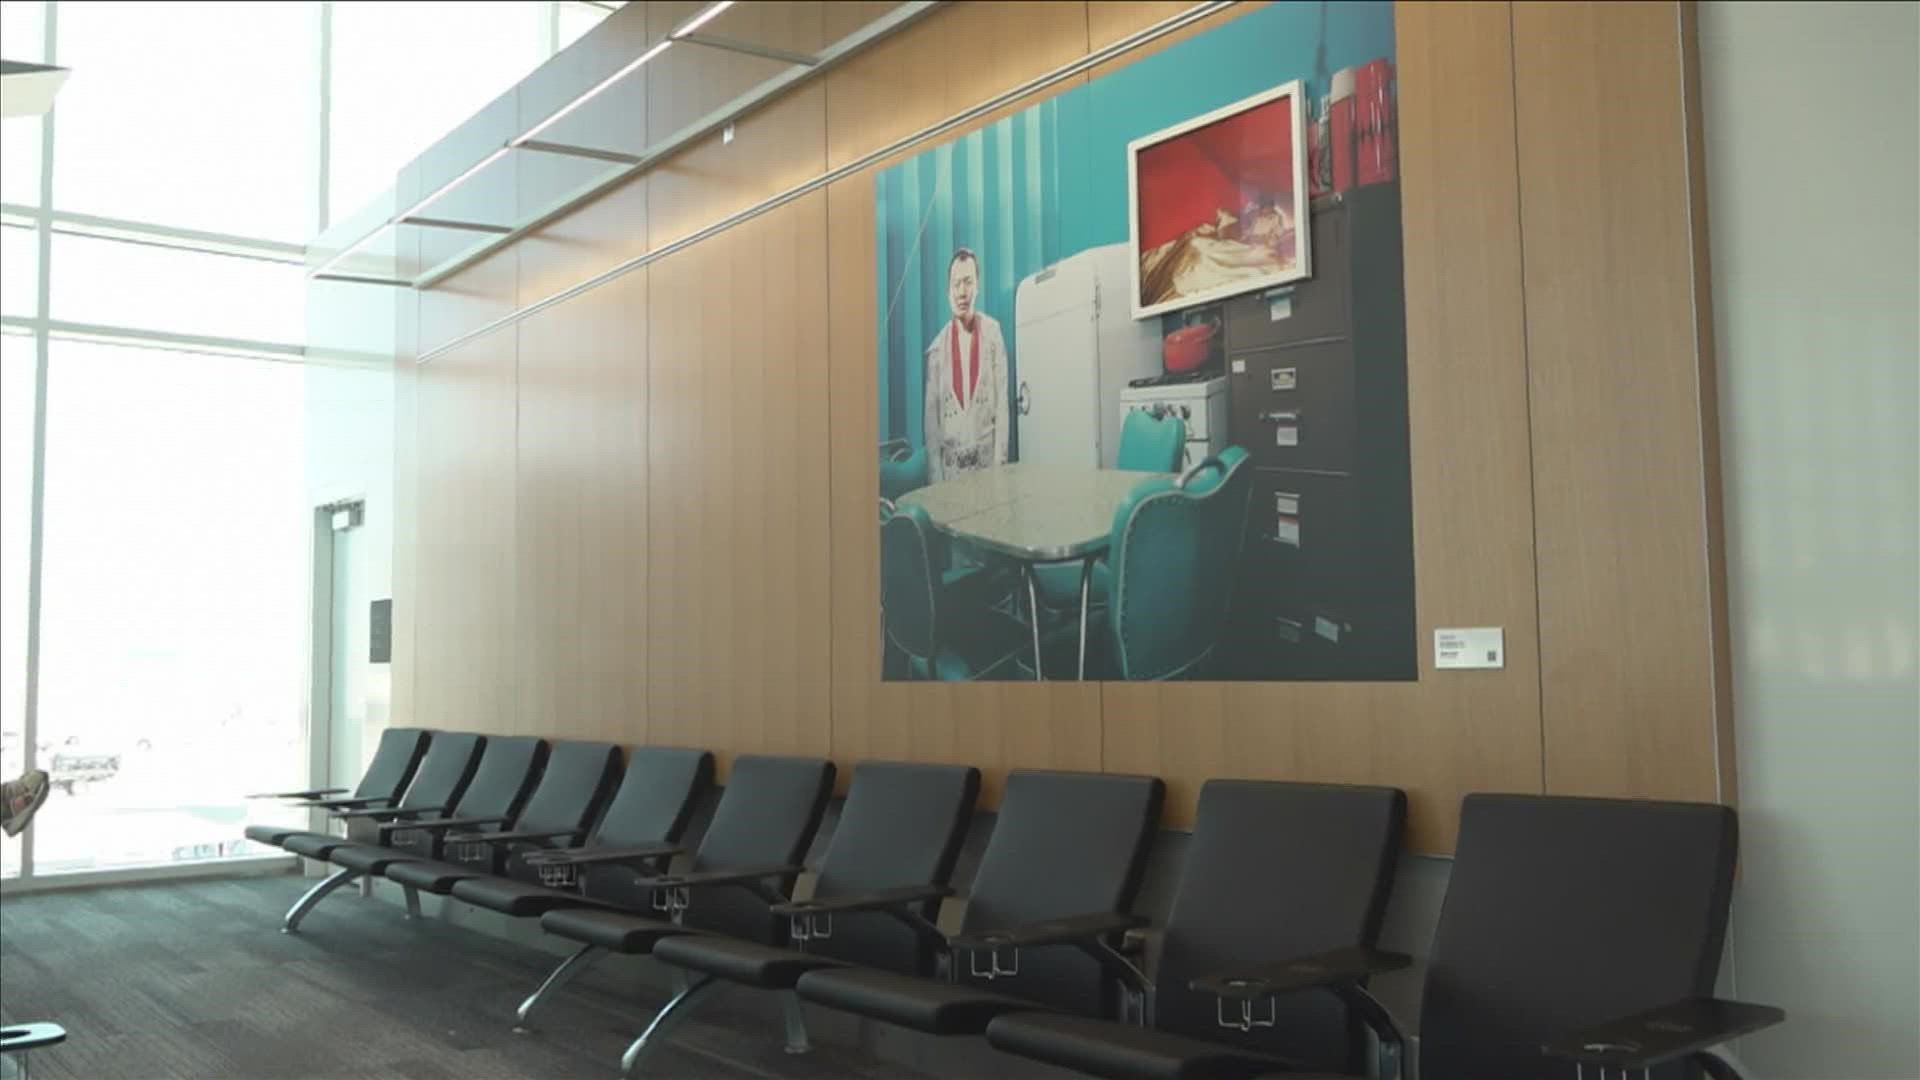 Memphis artist Tommy Kha's supporters on social media are claiming Asian-American hate caused the removal of Kha's artwork at the airport's new Concourse B.